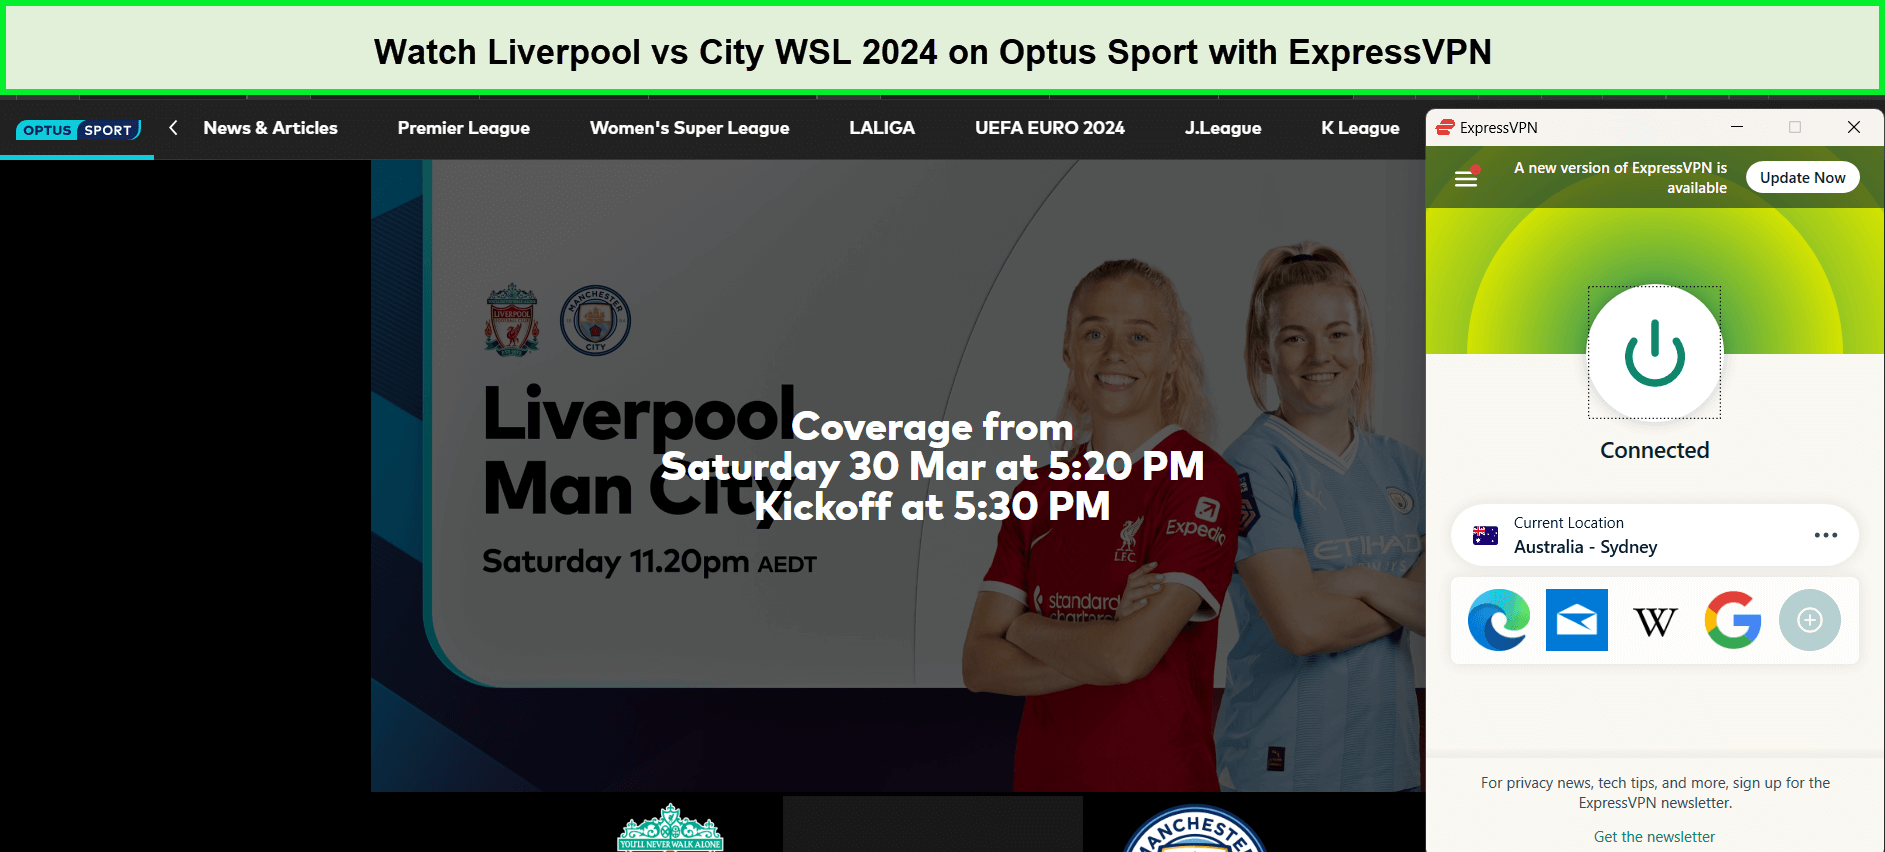 watch-Liverpool-vs-City-WSL-2024-in-UK-on-Optus-Sport-with-expressvpn